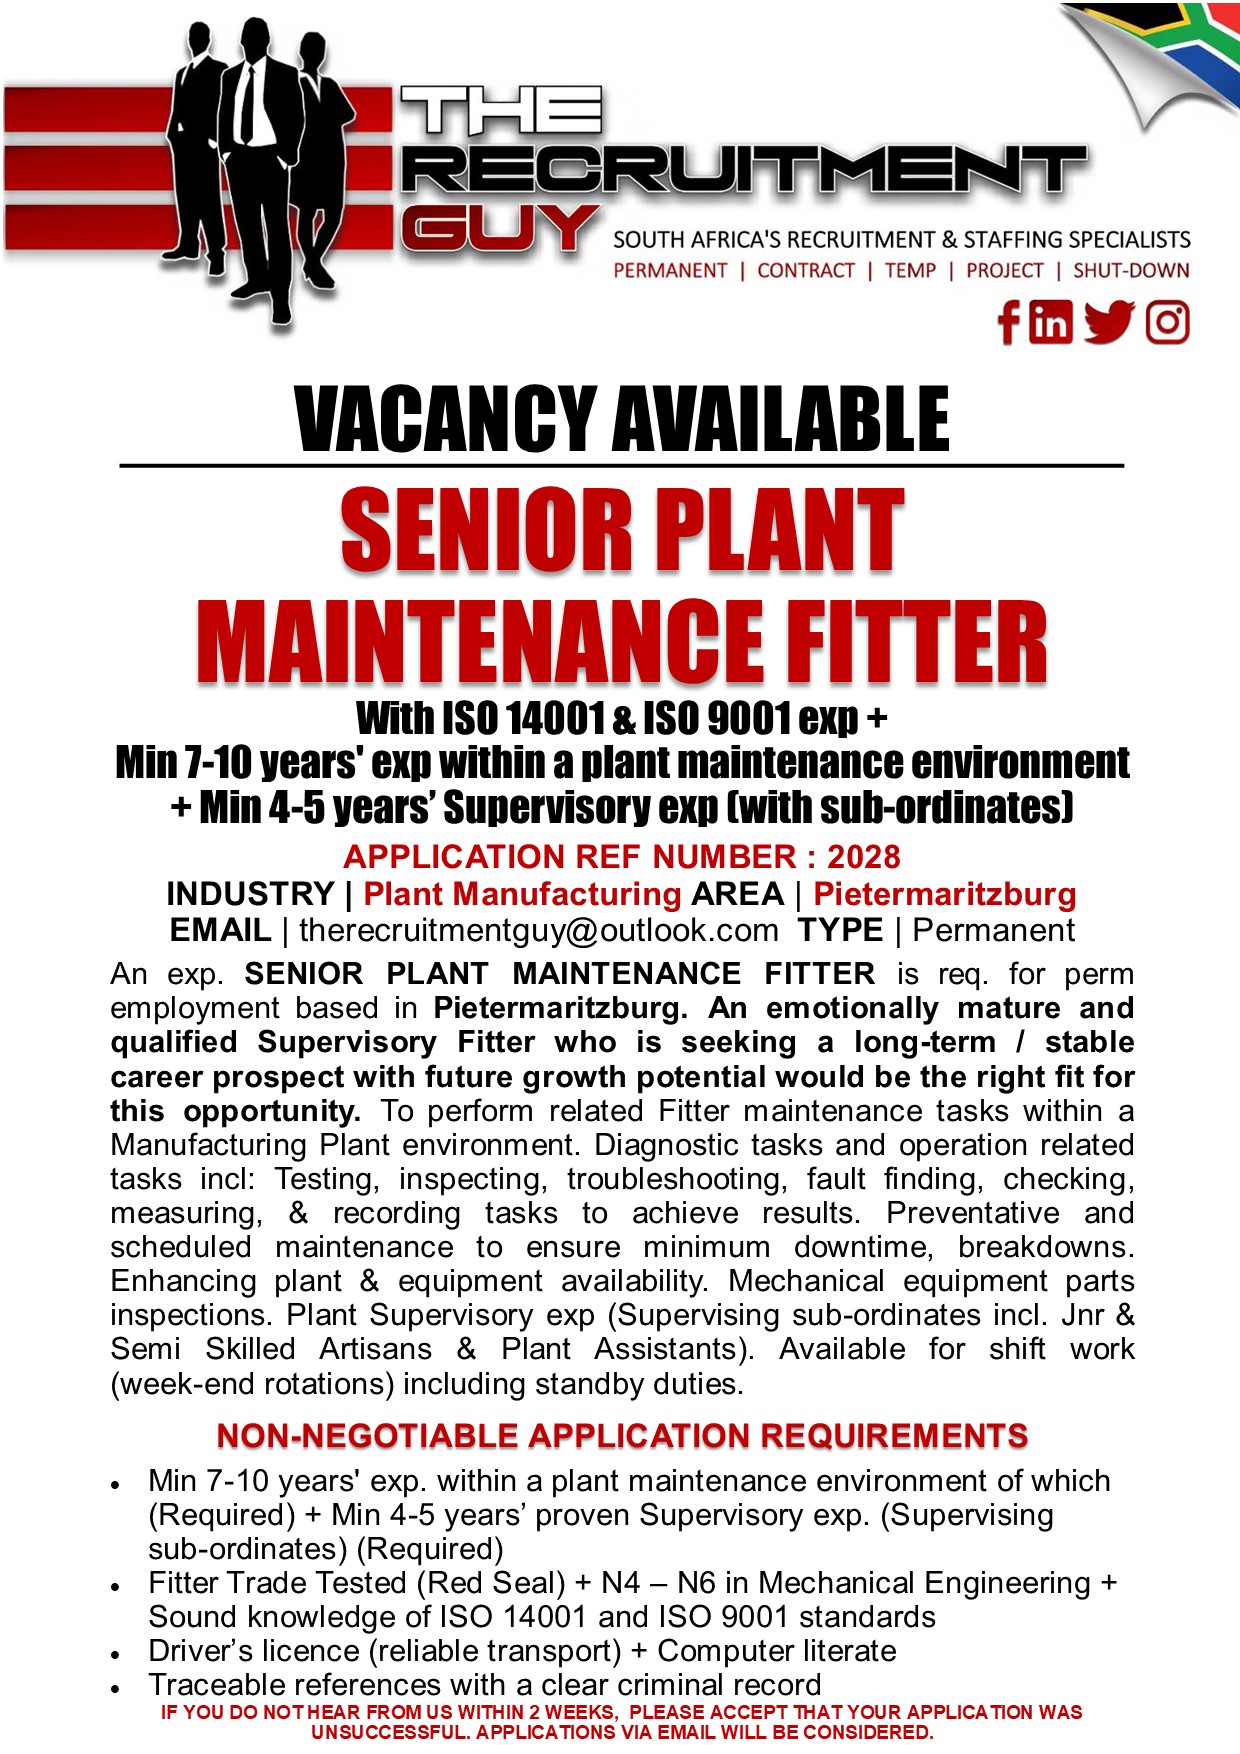 GN SOUTH AFRICA'S RECRUITMENT &amp; STAFFING SPECIALISTS

PERMANENT | CONTRACT | TEMP | PROJECT | SHUT-DOWN

{ink JG]

VACANCY AVAILABLE

SENIOR PLANT
MAINTENANCE FITTER

With ISO 14001 &amp; ISO 9001 exp +
Min 7-10 years' exp within à plant maintenance environment
+ Min 4-5 years’ Supervisory exp (with sub-ordinates)
APPLICATION REF NUMBER : 2028

INDUSTRY | Plant Manufacturing AREA | Pietermaritzburg
EMAIL | therecruitmentguy@outlook.com TYPE | Permanent

An exp. SENIOR PLANT MAINTENANCE FITTER is req. for perm
employment based in Pietermaritzburg. An emotionally mature and
qualified Supervisory Fitter who is seeking a long-term / stable
career prospect with future growth potential would be the right fit for
this opportunity. To perform related Fitter maintenance tasks within a
Manufacturing Plant environment. Diagnostic tasks and operation related
tasks incl: Testing, inspecting, troubleshooting, fault finding, checking,
measuring, &amp; recording tasks to achieve results. Preventative and
scheduled maintenance to ensure minimum downtime, breakdowns.
Enhancing plant &amp; equipment availability. Mechanical equipment parts
inspections. Plant Supervisory exp (Supervising sub-ordinates incl. Jnr &amp;
Semi Skilled Artisans &amp; Plant Assistants). Available for shift work
(week-end rotations) including standby duties.

NON-NEGOTIABLE APPLICATION REQUIREMENTS

« Min 7-10 years' exp. within a plant maintenance environment of which
(Required) + Min 4-5 years’ proven Supervisory exp. (Supervising
sub-ordinates) (Required)

« Fitter Trade Tested (Red Seal) + N4 — N6 in Mechanical Engineering +
Sound knowledge of ISO 14001 and ISO 9001 standards

+ Driver's licence (reliable transport) + Computer literate

« Traceable references with a clear criminal record
IF YOU DO NOTHEAR FROM US WITHIN 2 WEEKS, PLEASE ACCEPT THAT YOUR APPLICATION WAS
UNSUCCESSFUL. APPLICATIONS VIA EMAIL WILL BE CONSIDERED.